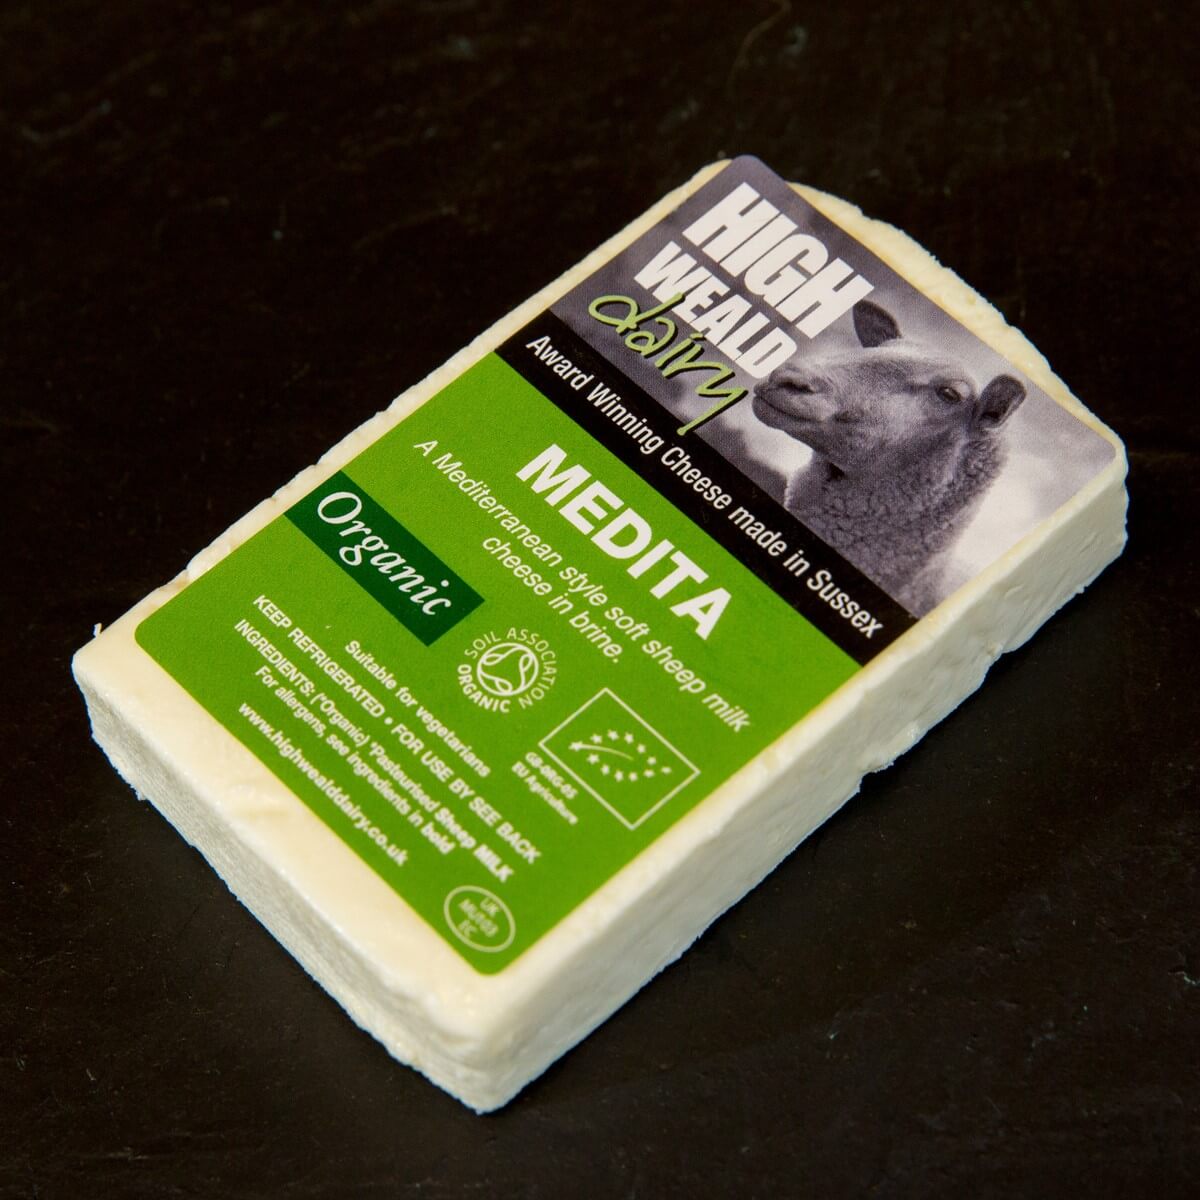 Image of High Weald Organic Medita by High Weald Dairy, designed, produced or made in the UK. Buying this product supports a UK business, jobs and the local community.